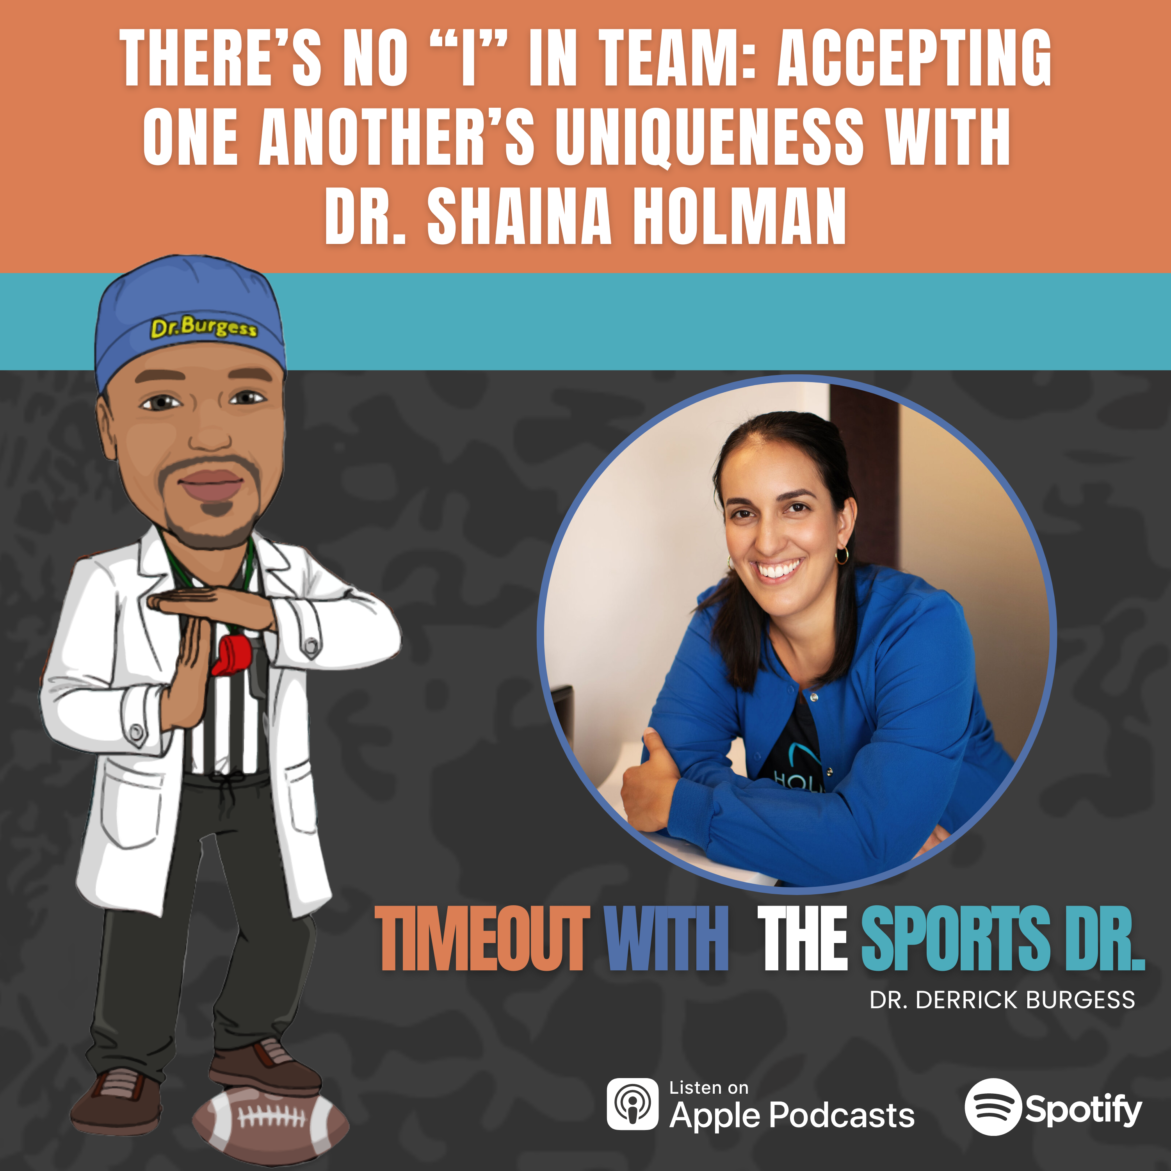 Black Podcasting - There’s No “I” in Team: Accepting One Another’s Uniqueness with Dr. Shaina Holman